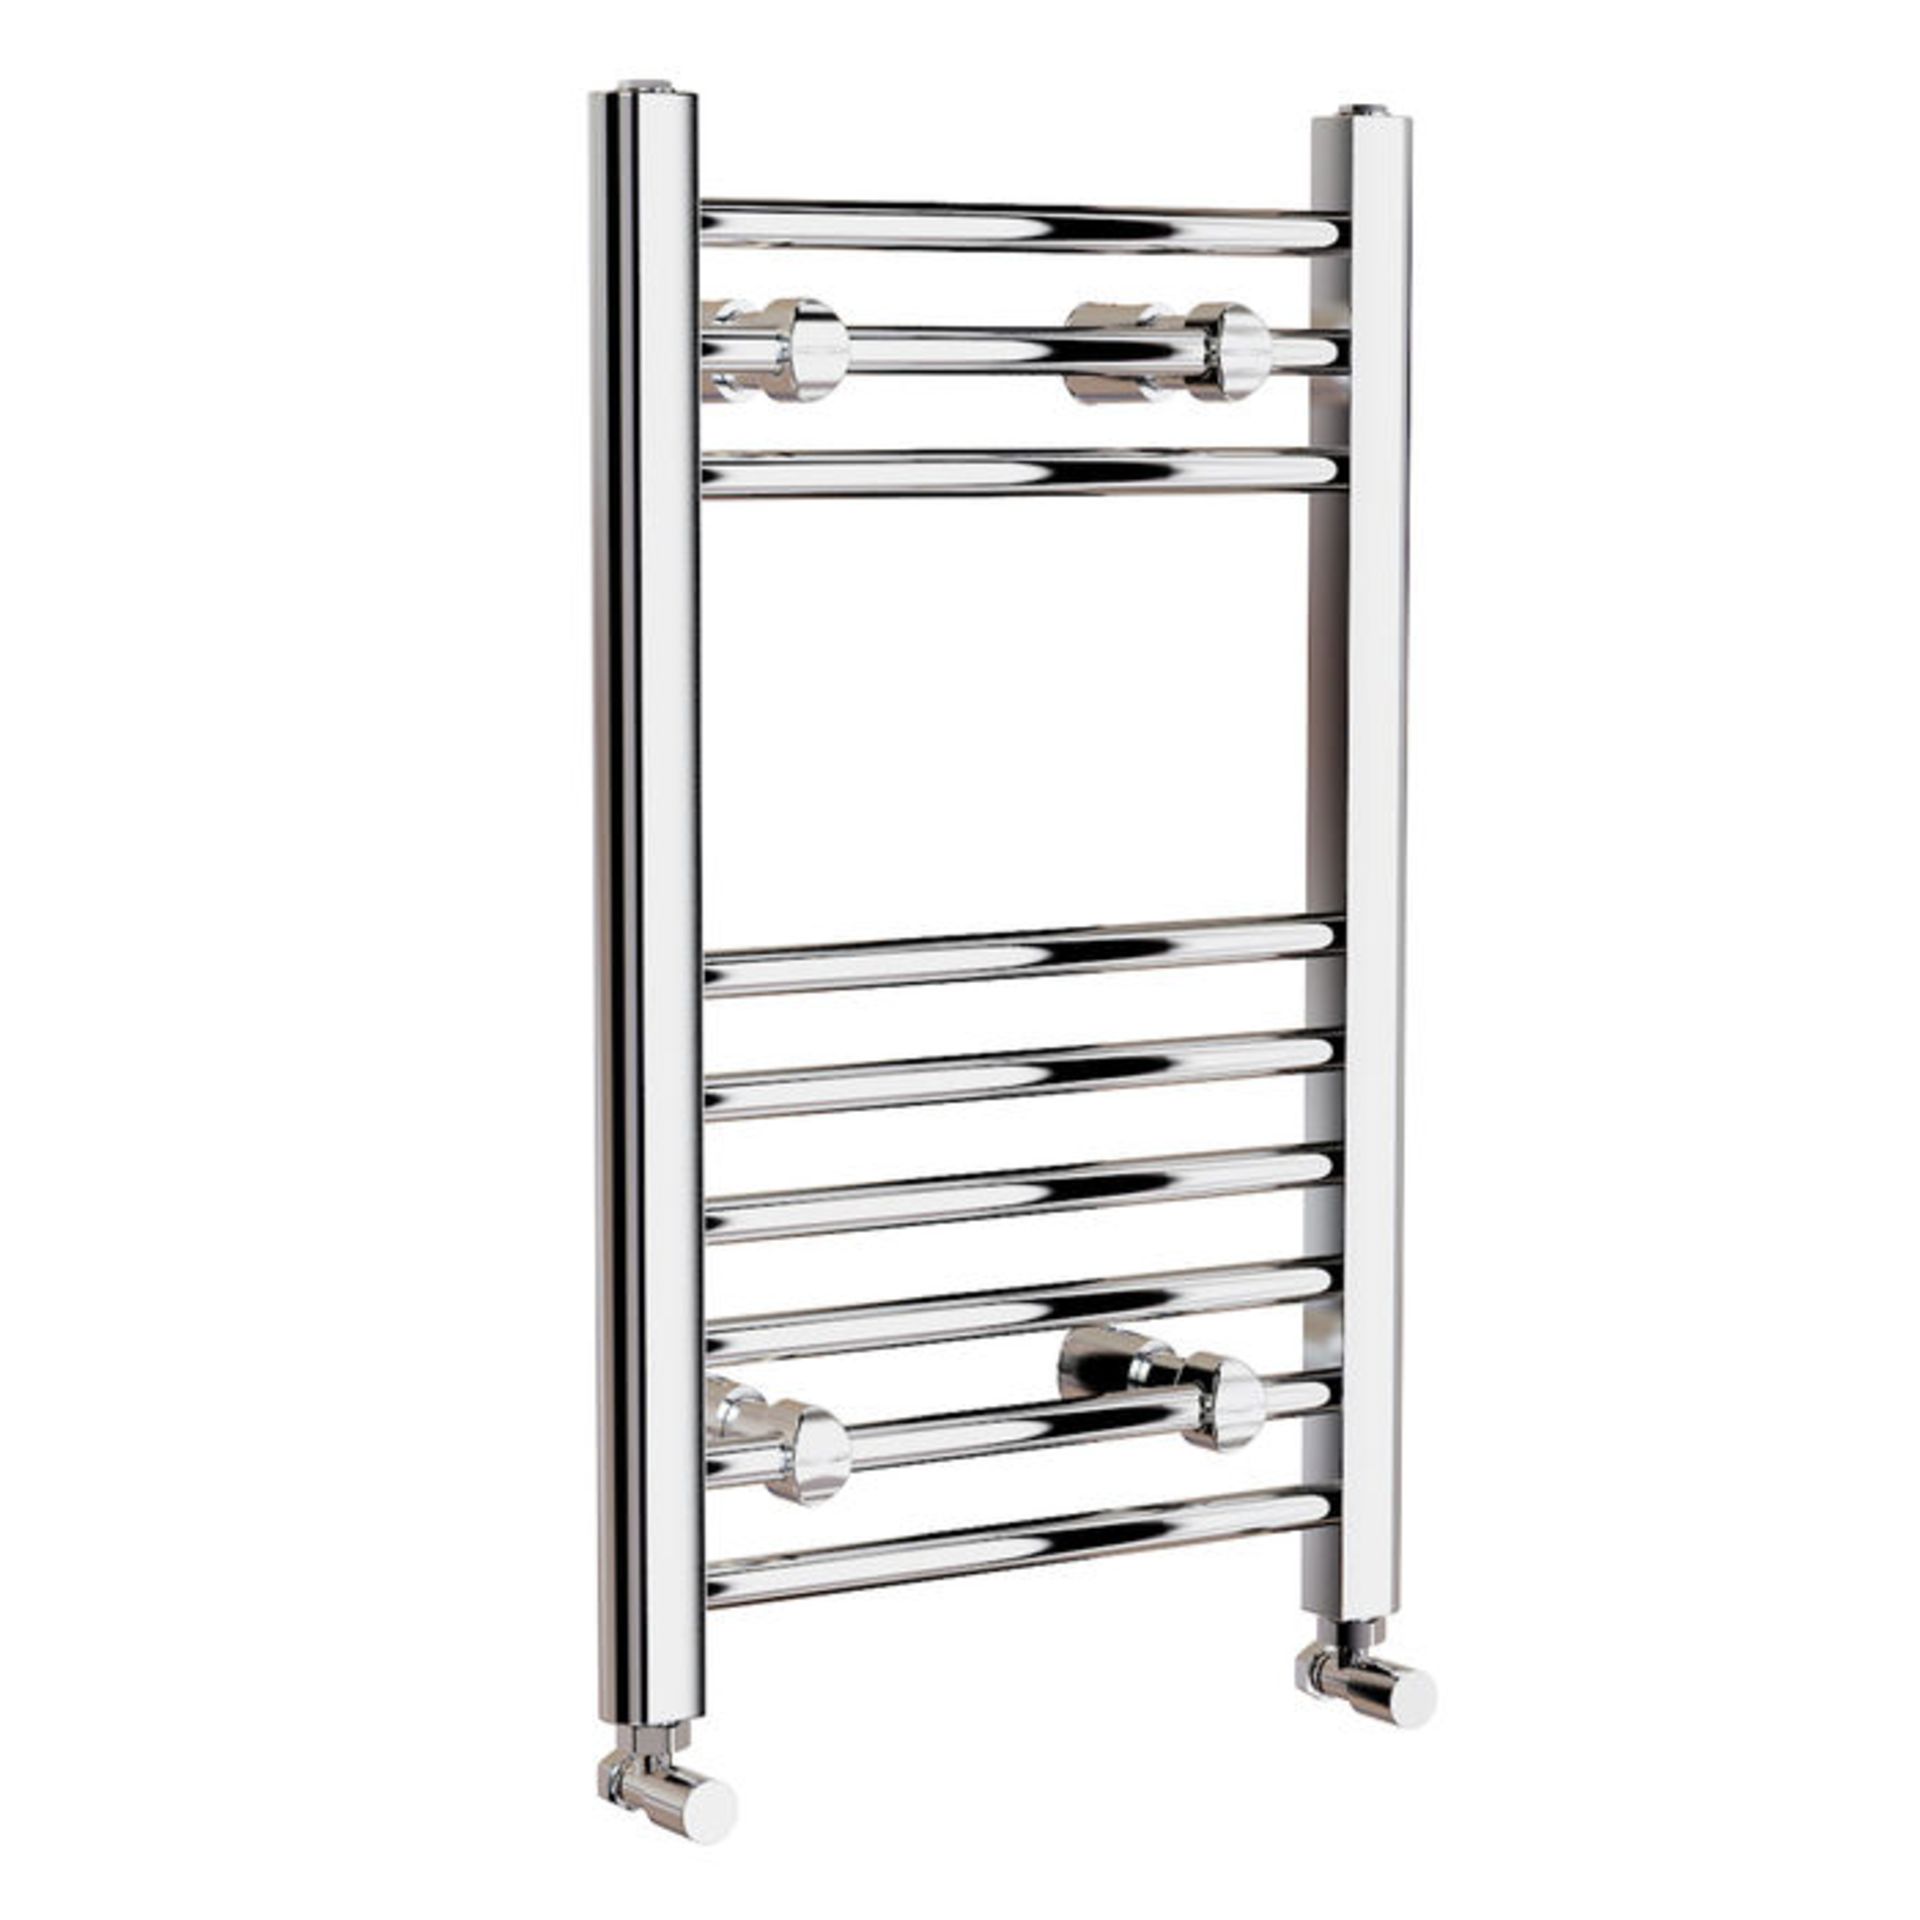 (KL101) 650x400mm Straight Heated Towel Radiator. RRP £44.00. Low carbon steel chrome plated